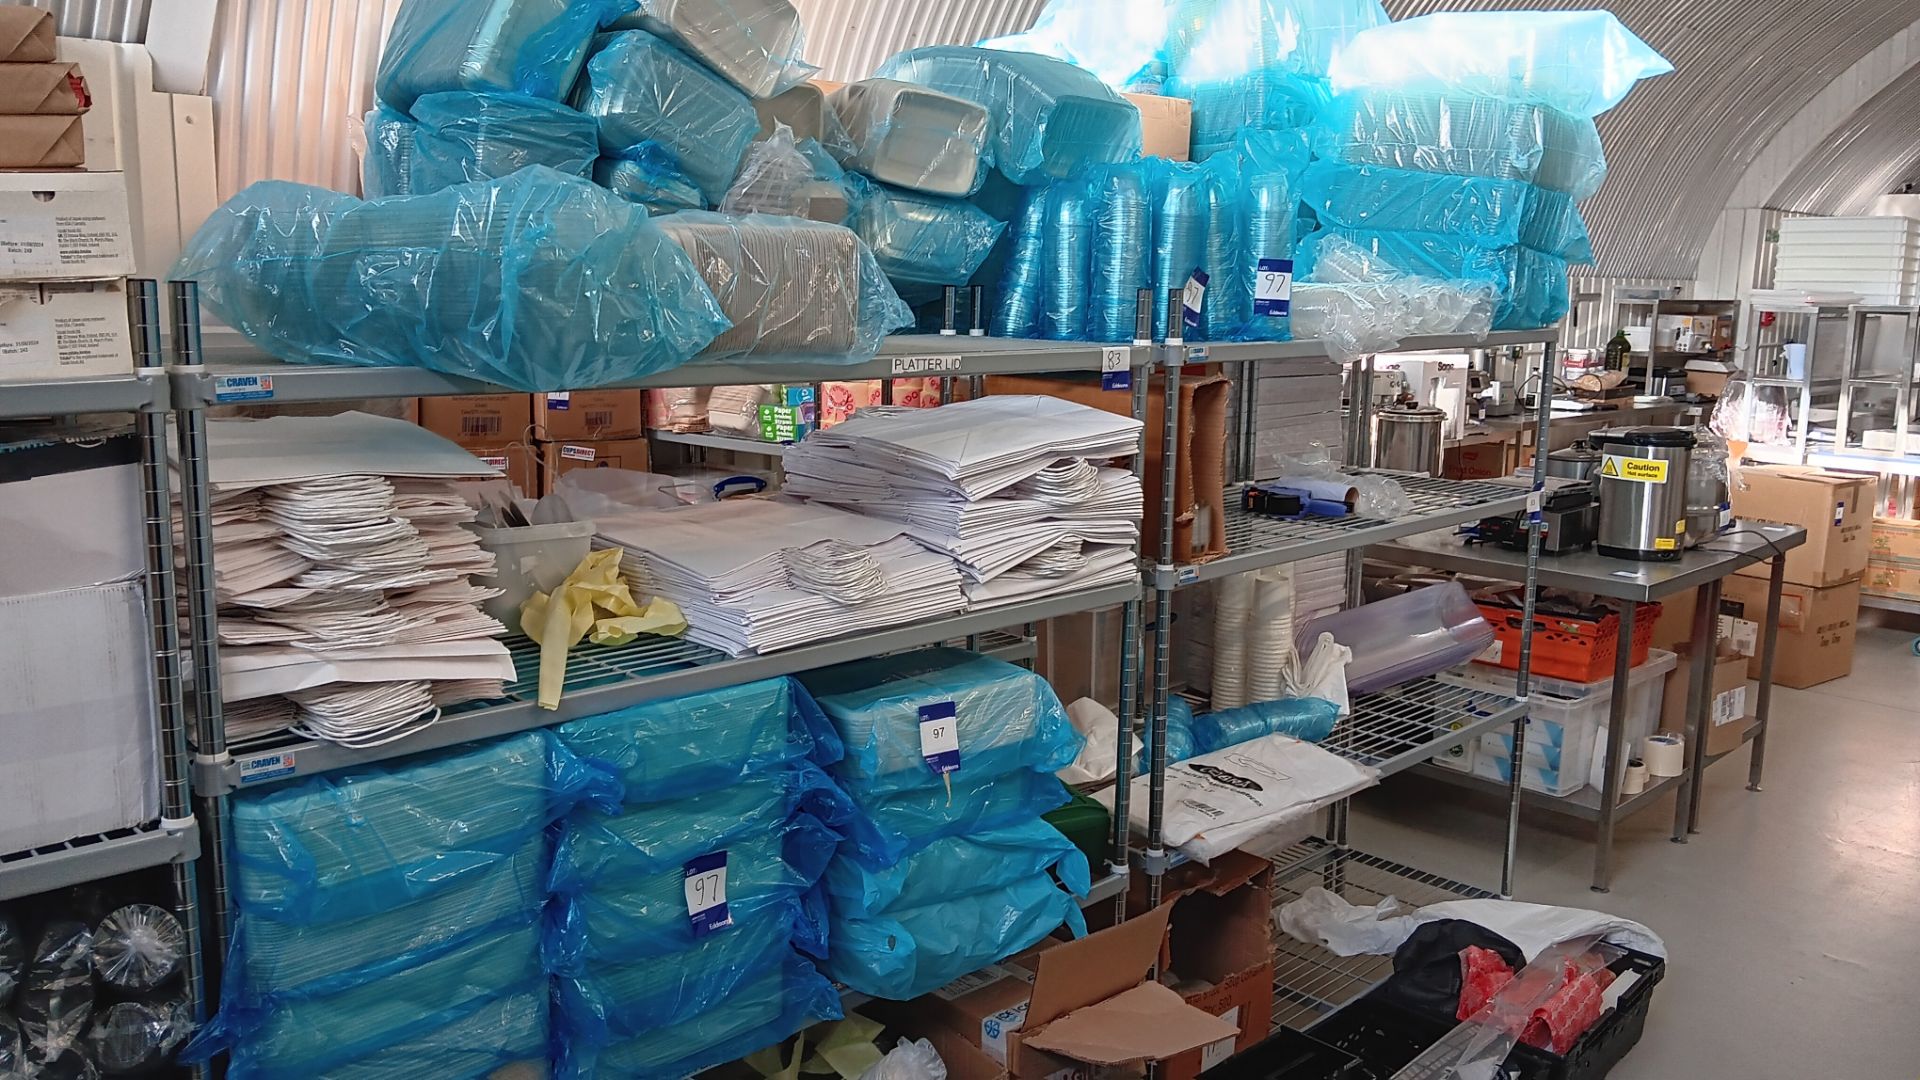 Contents of 2 racks of various packaging and consumables to include white paper bags, plastic and